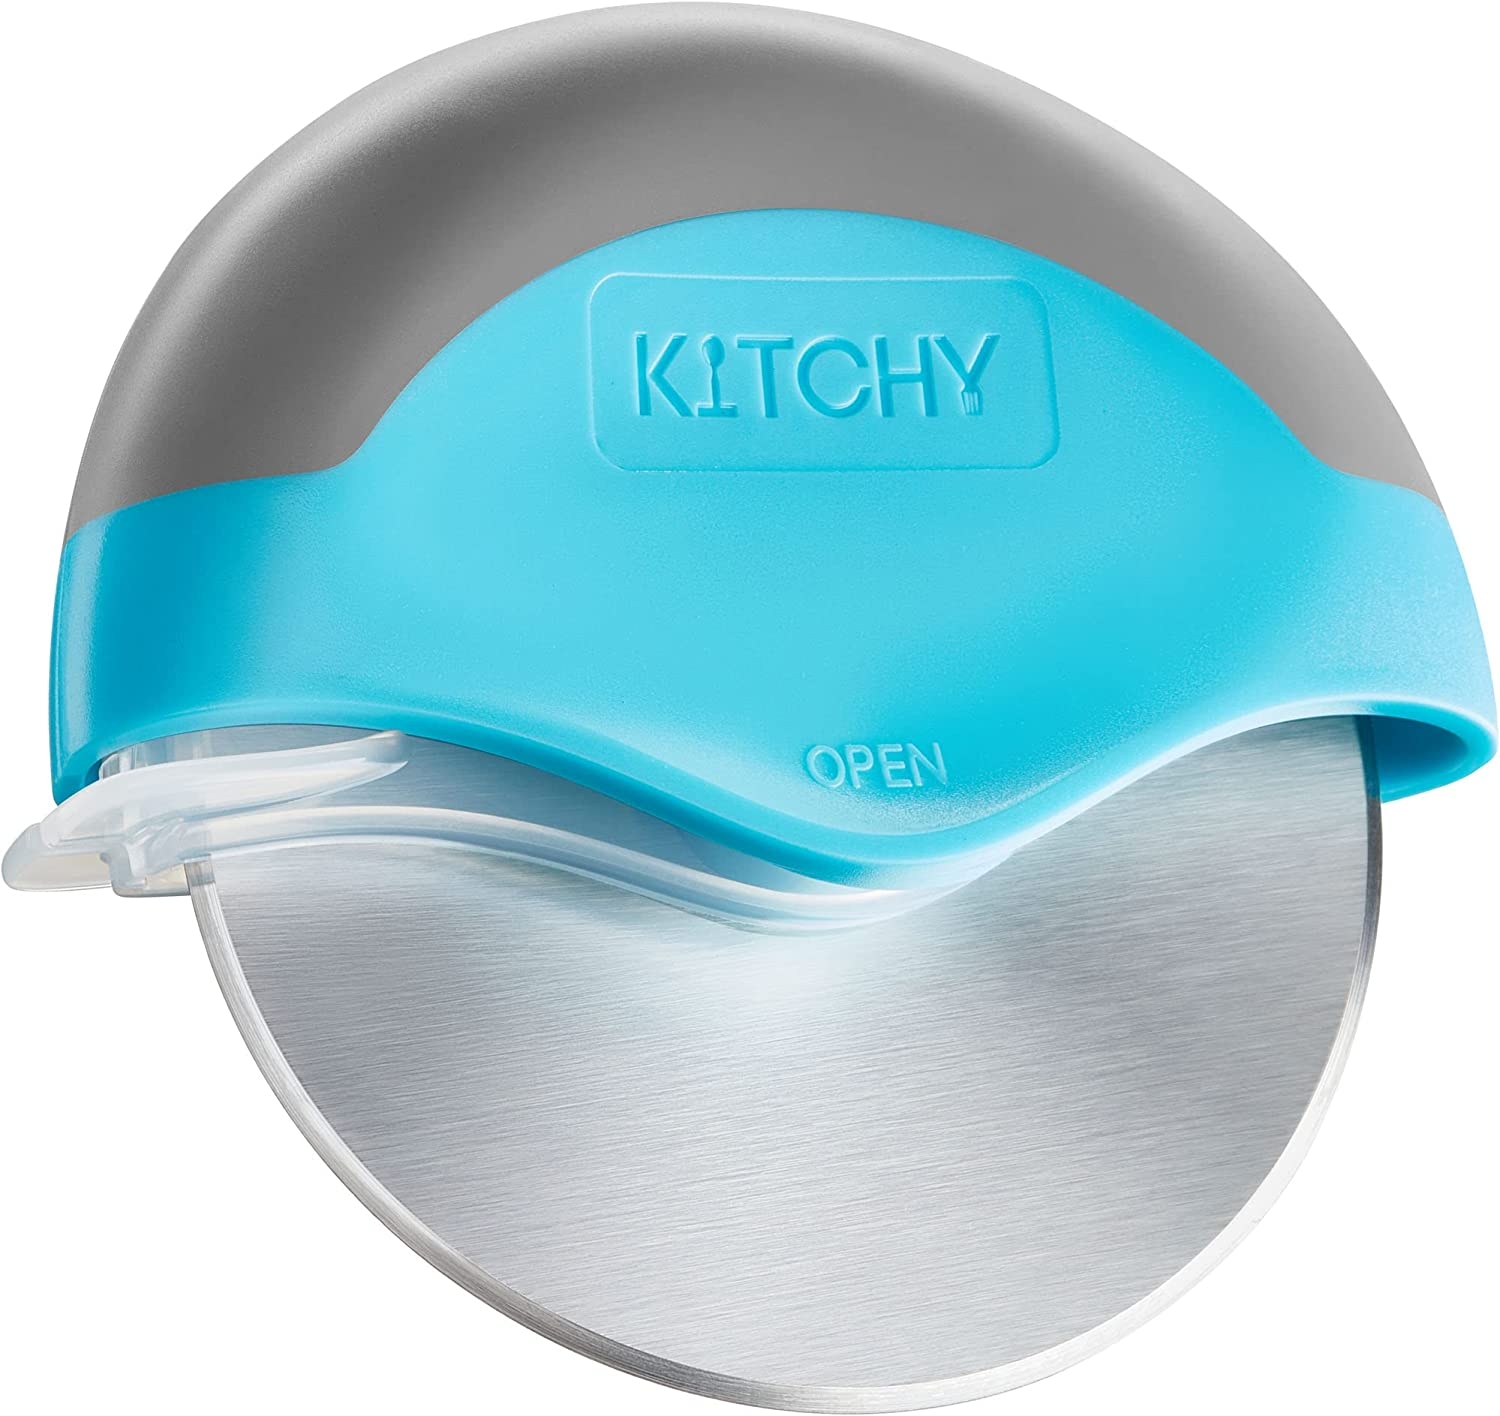 Kitchy Pizza Cutter Wheel – No Effort Pizza Slicer with Protective Blade Guard and Ergonomic Handle – Super Sharp and Dishwasher